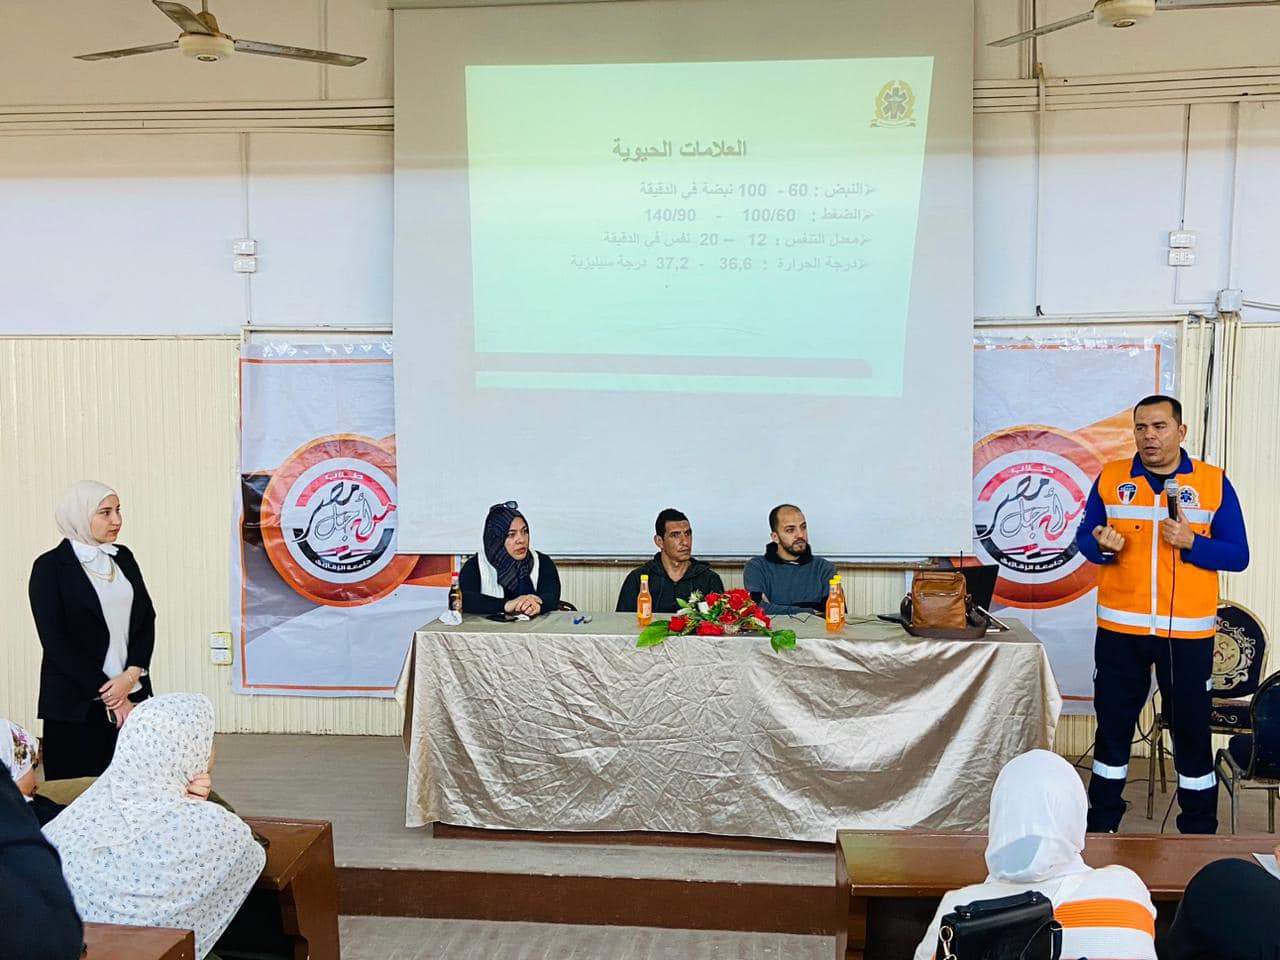 The Student Welfare Department, in cooperation with the female students of the Union, organized an important seminar entitled "First Aid for Children" lectured by paramedic Mr. Rami Ahmed - 1/ Saad Mohammed Al-Sayed